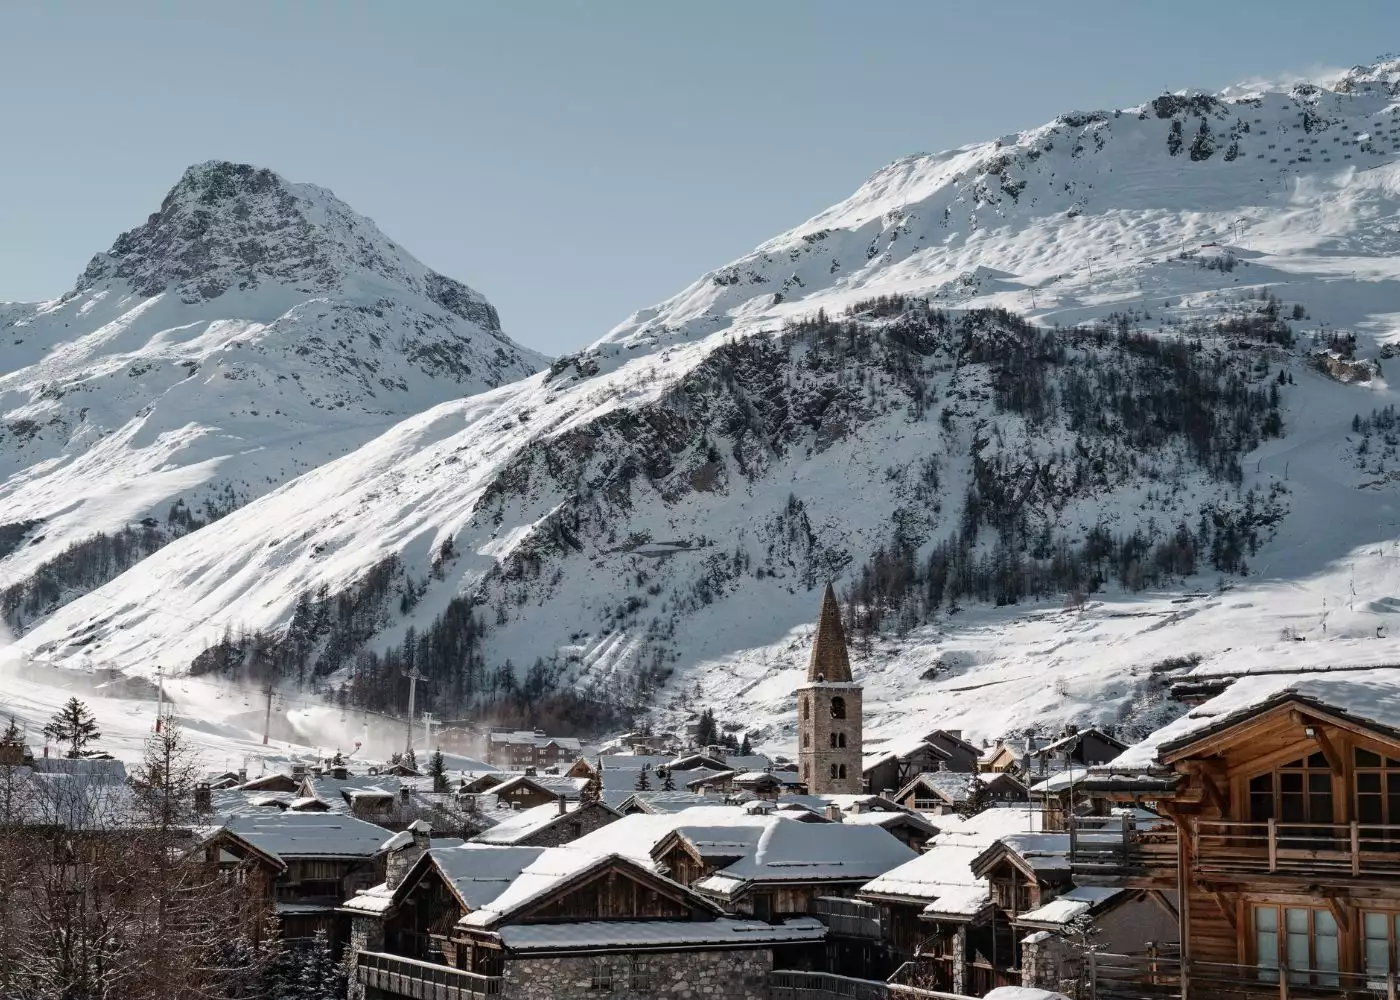 BEING A PROPERTY OWNER IN VAL D'ISÈRE